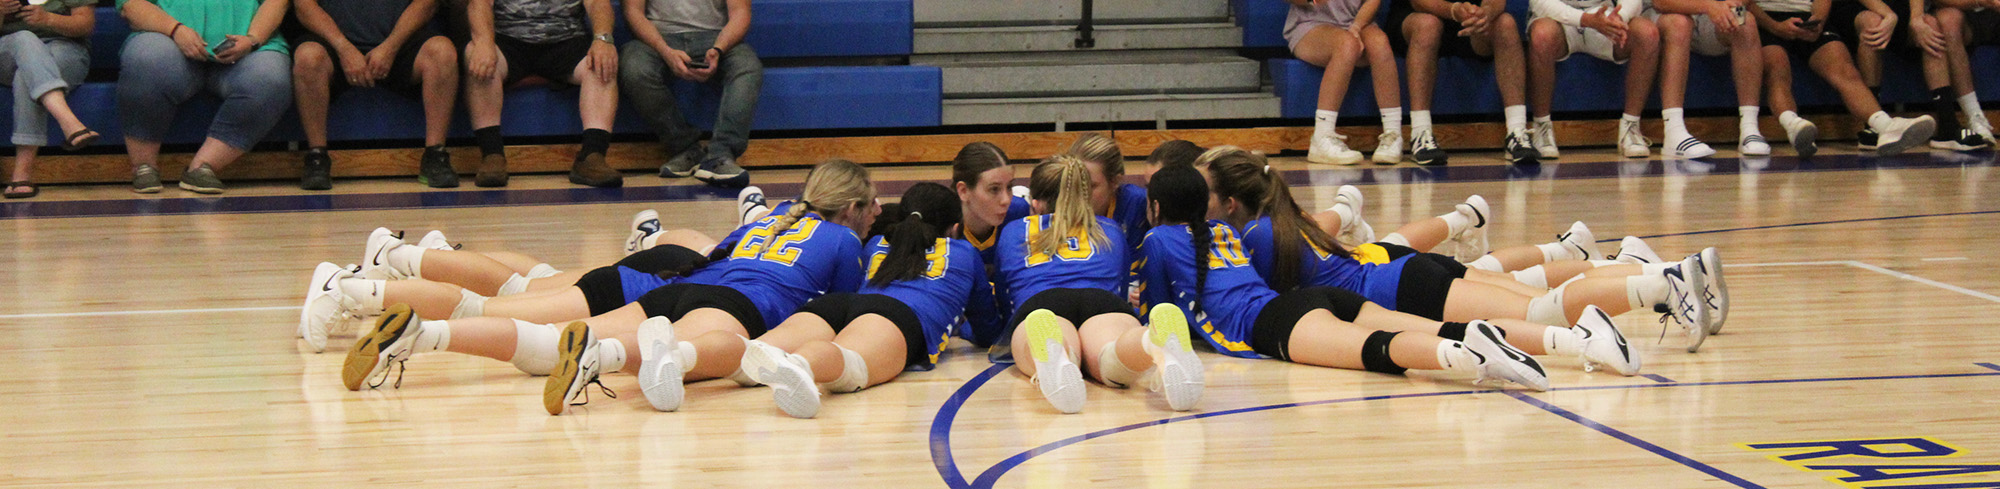 Girls volleyball team in a circle on the gym floor with coach